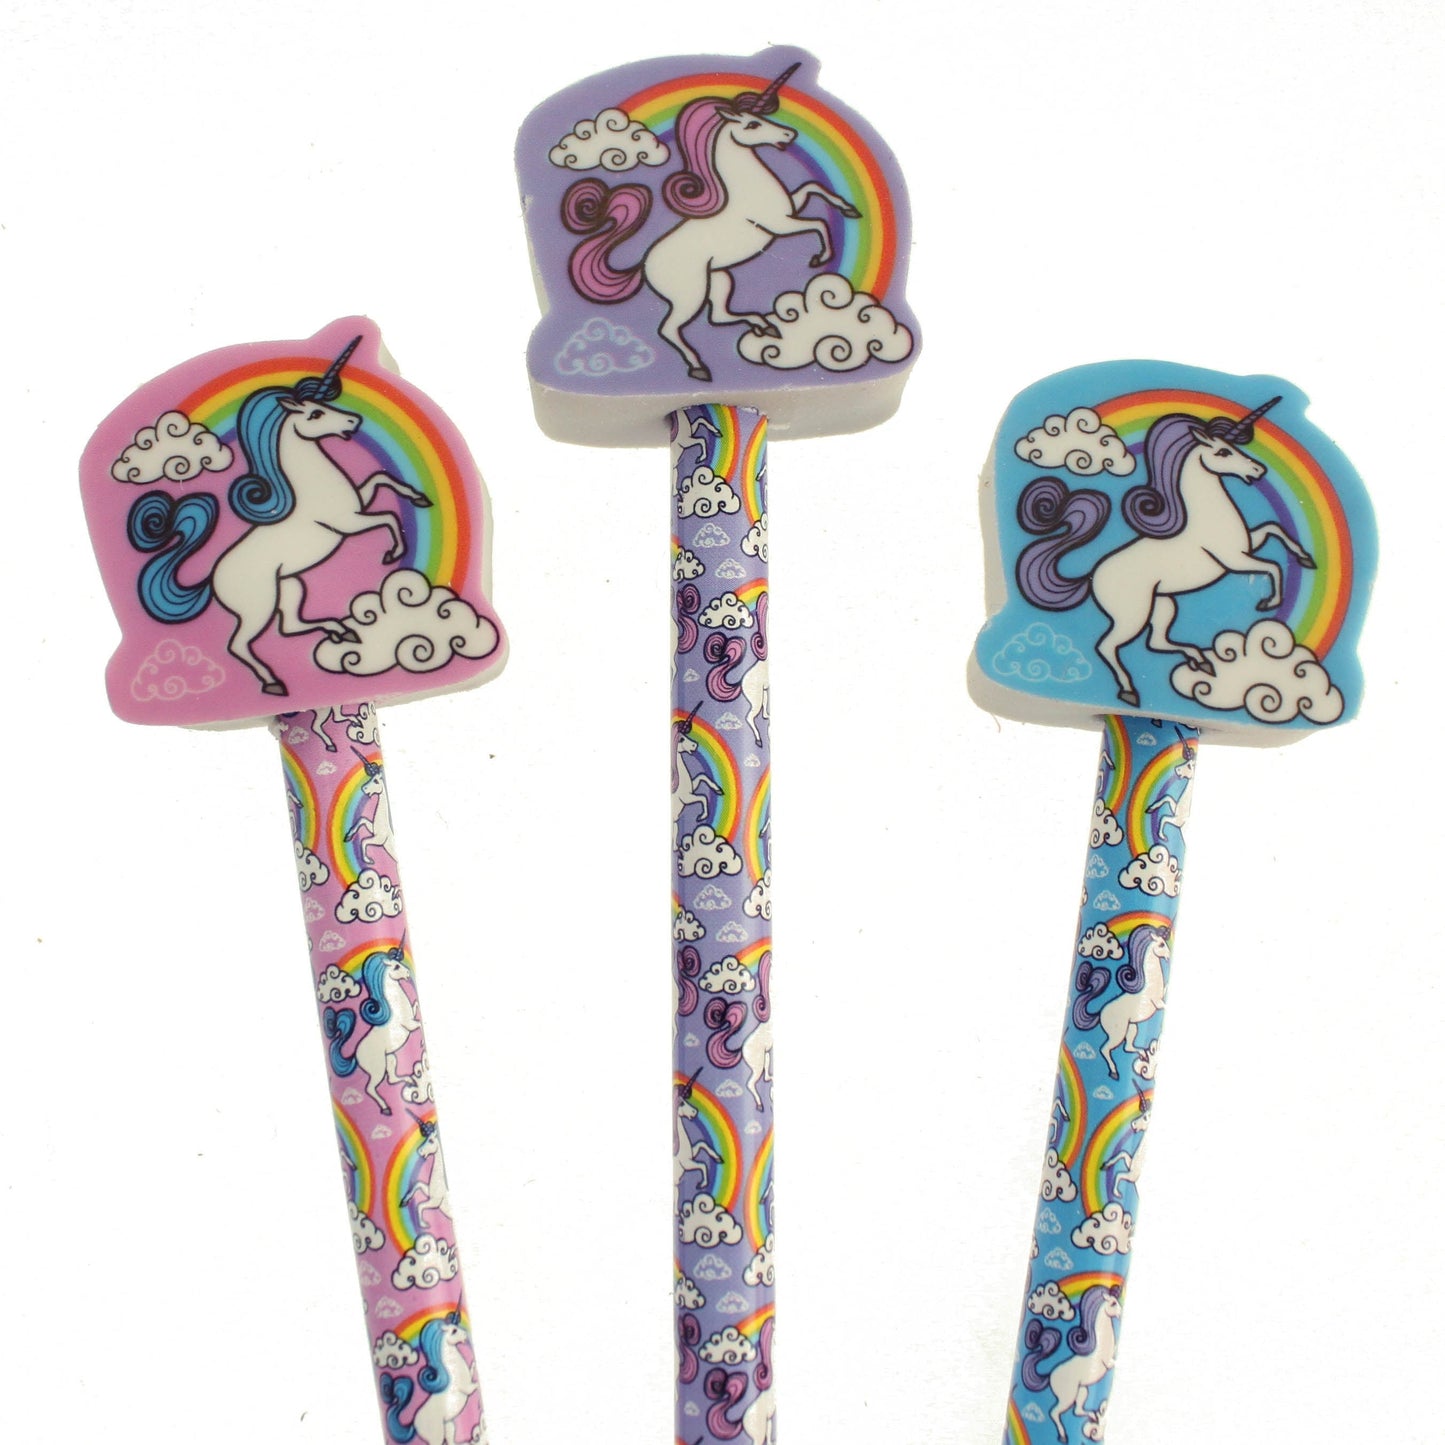 Unicorn Theme Party Bag | Eco Conscious | Low Plastic Content - Ready to Fill Party Bags | Childrens Party Bags | Party Bags